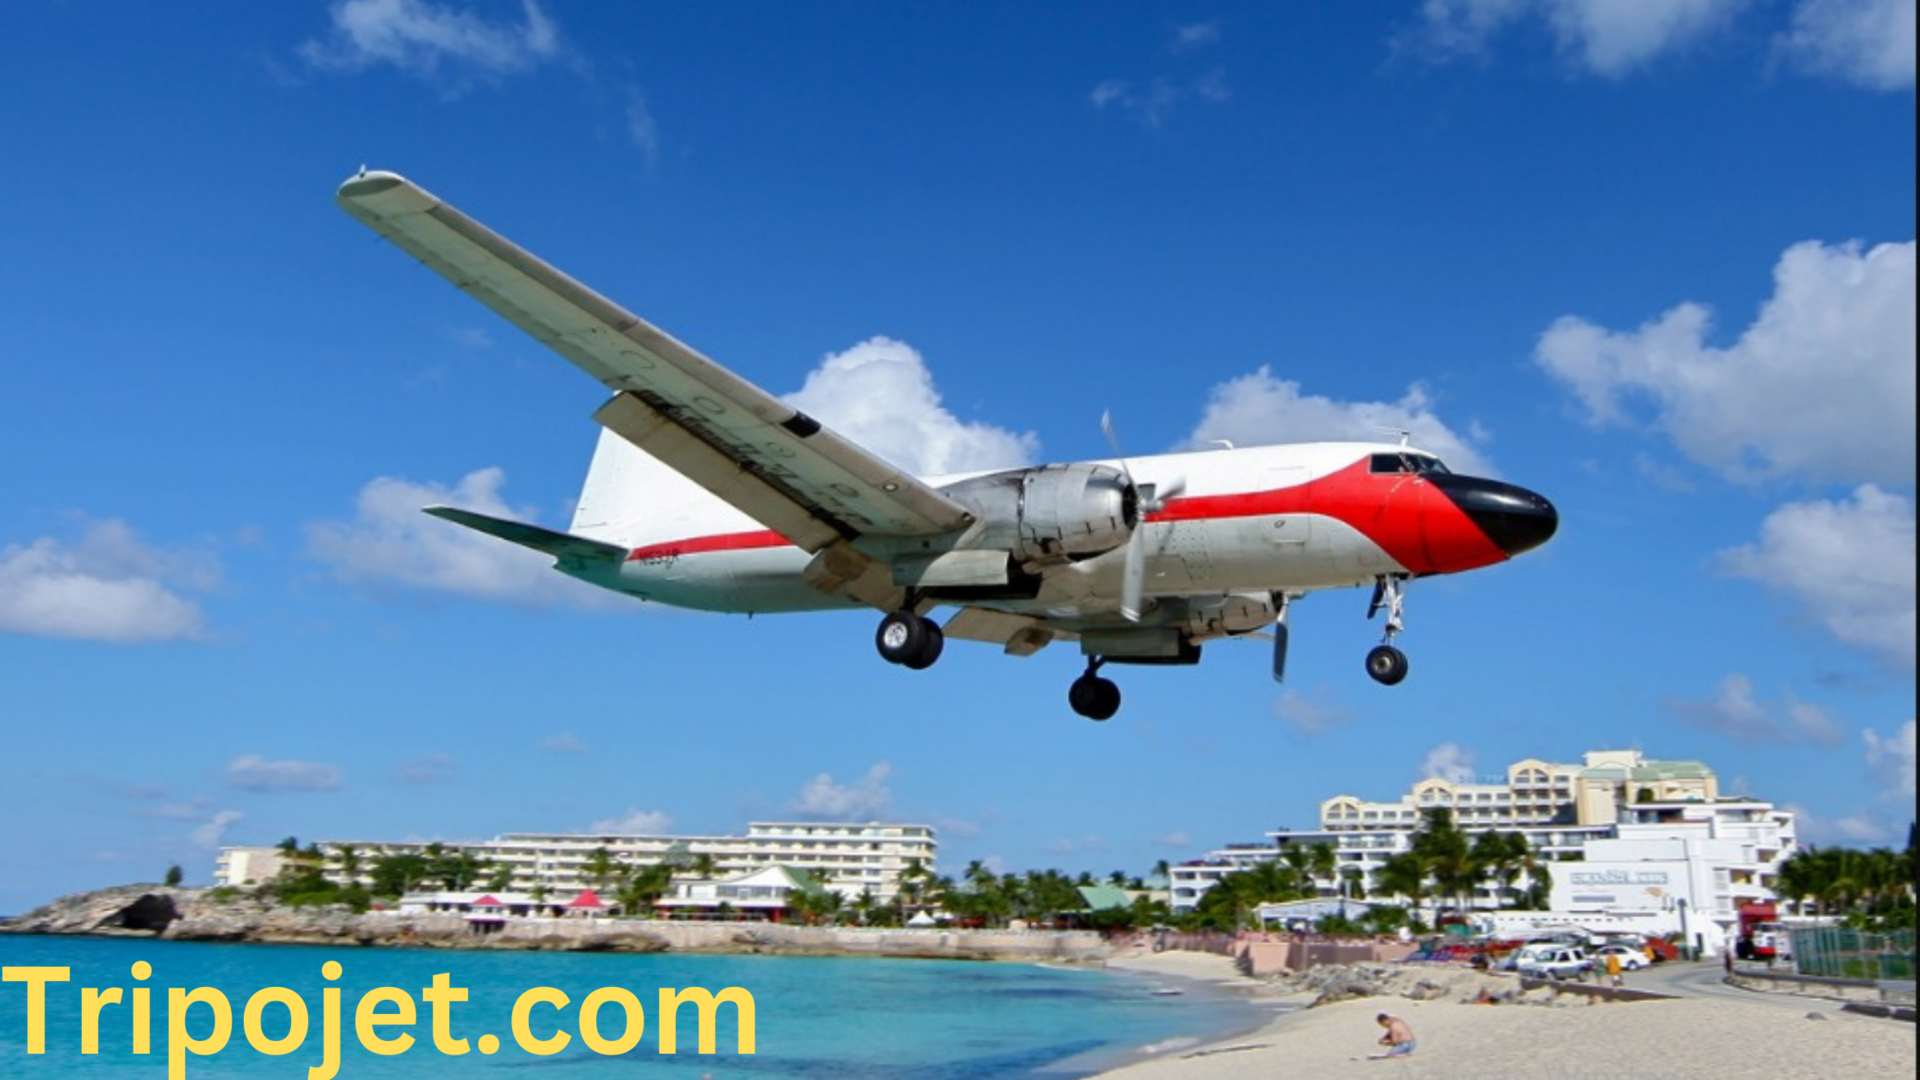 How to get to Puerto Rico without flying?